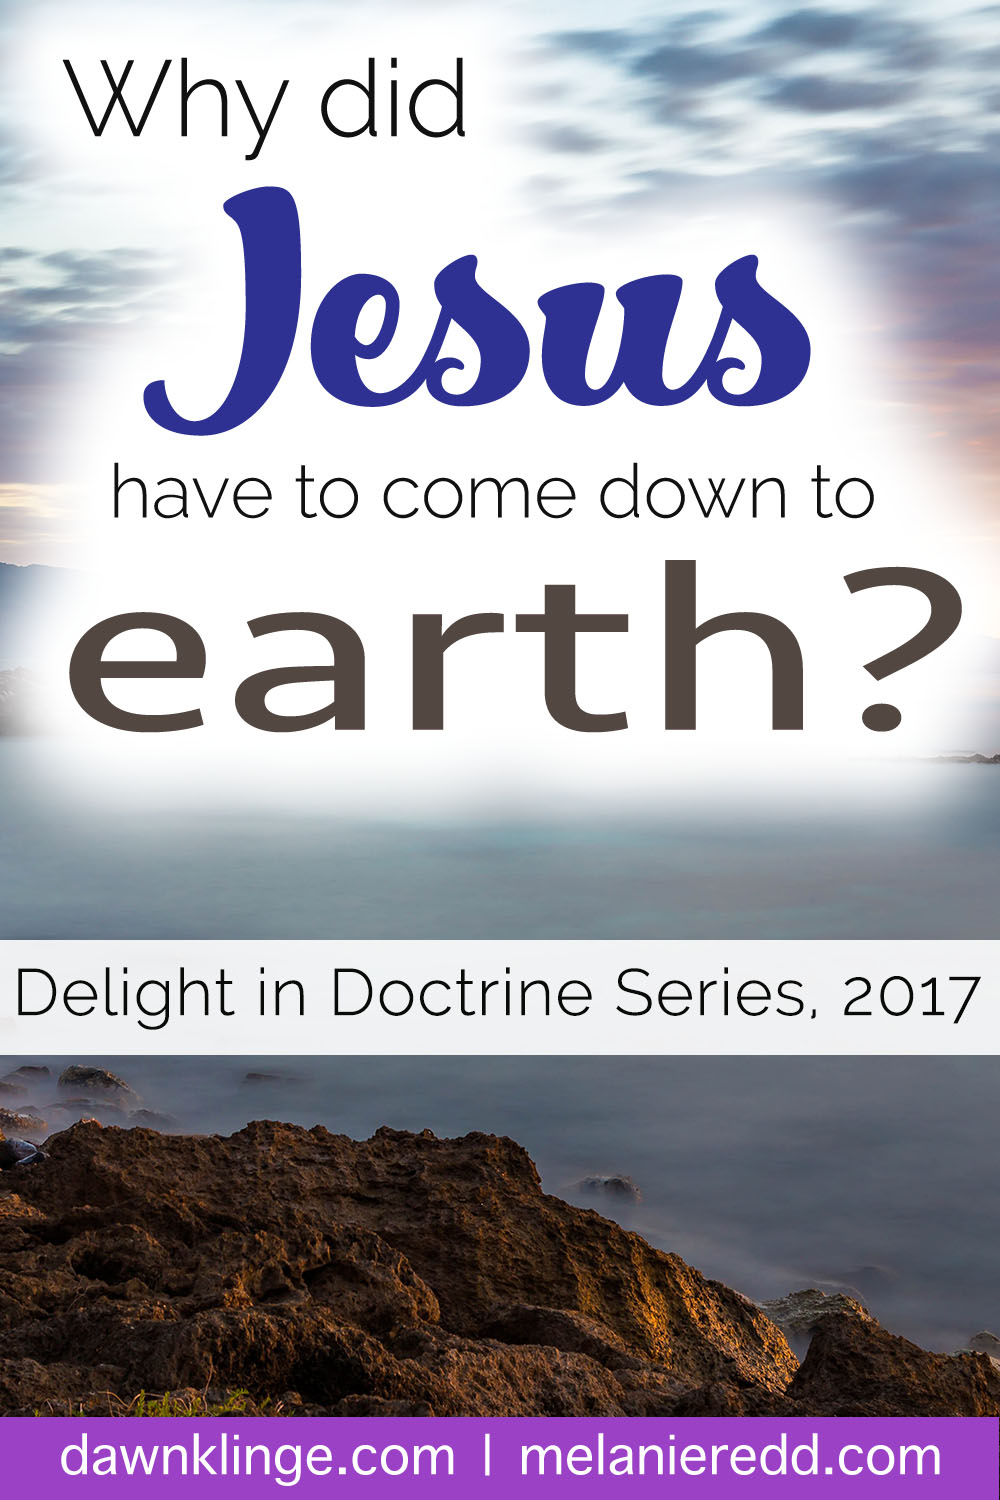 Why did Jesus have to come down to earth?